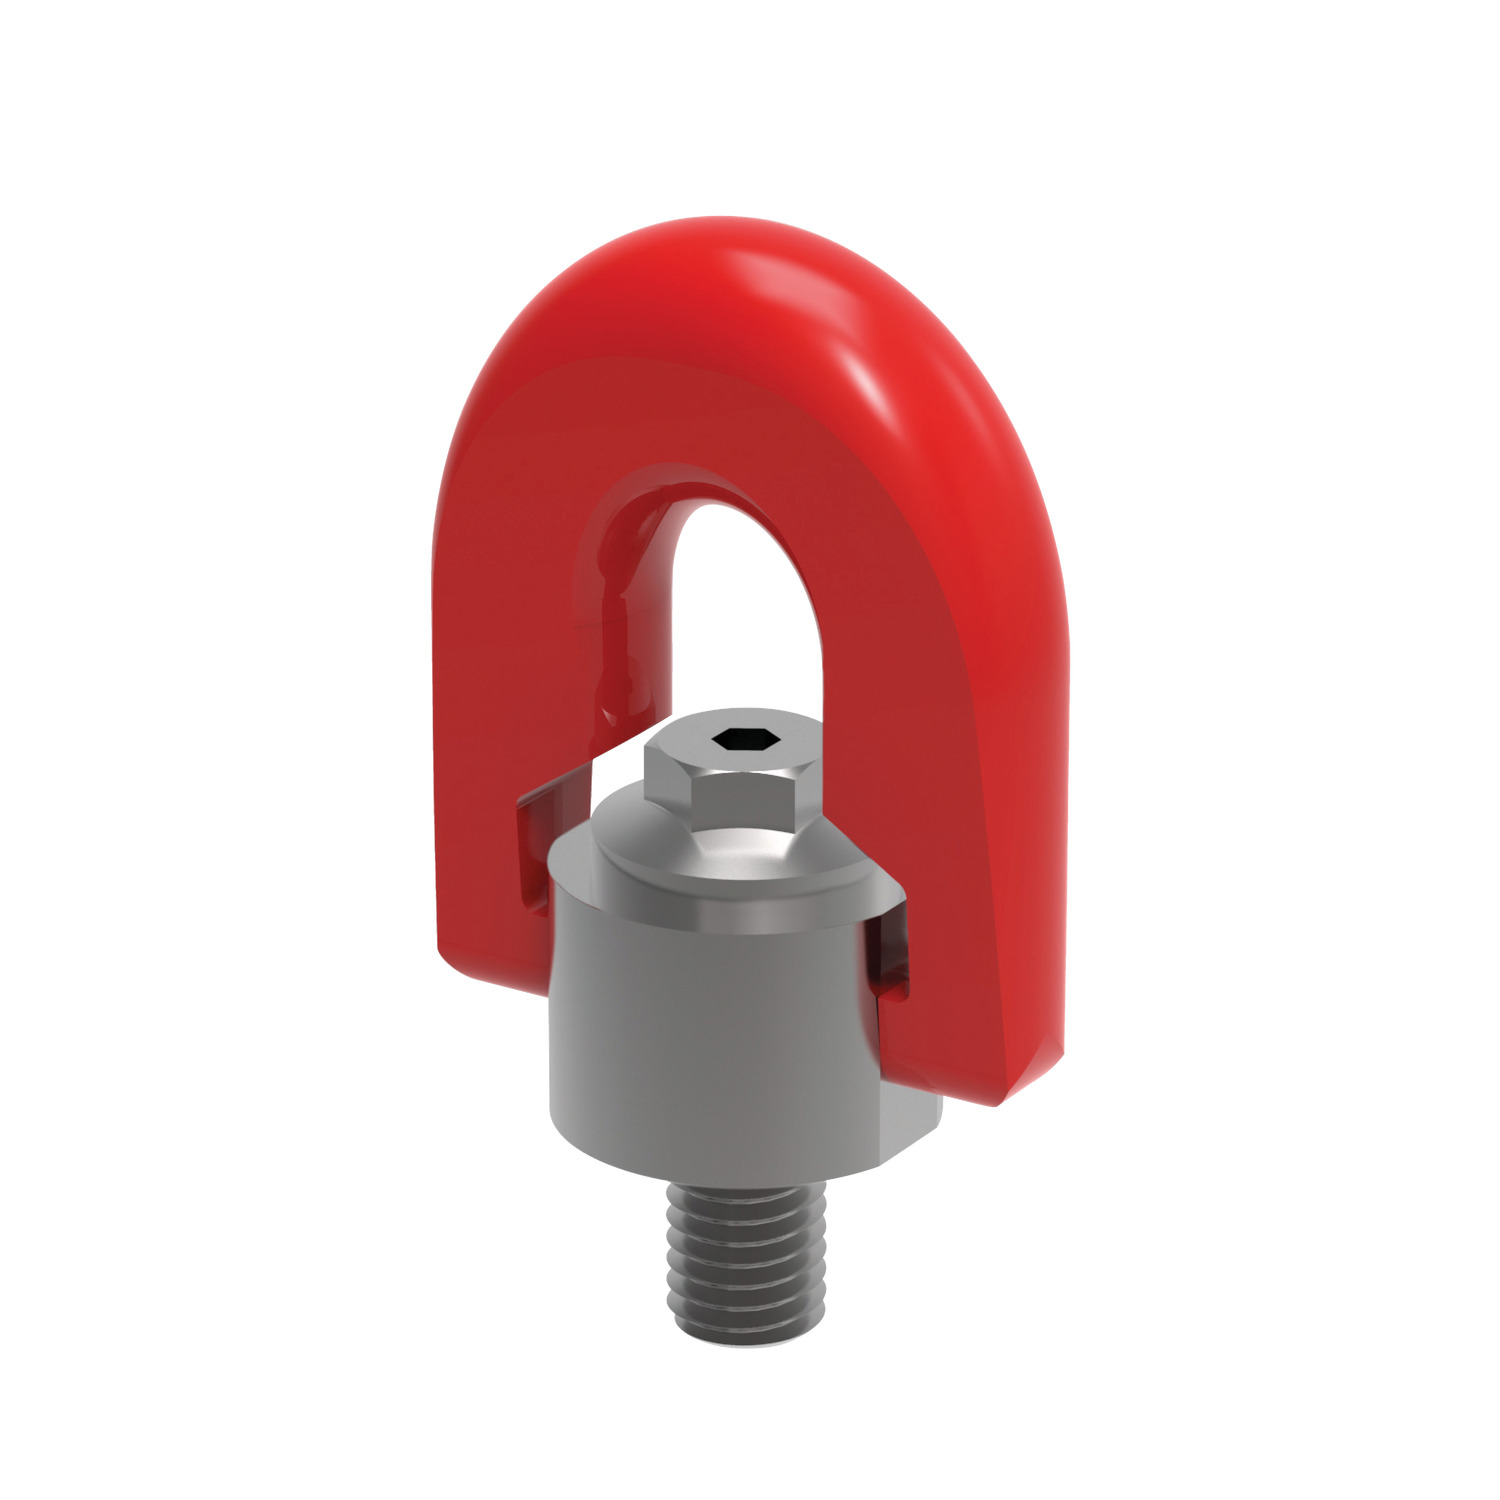 P4012 - Double Swivel Lifting Points